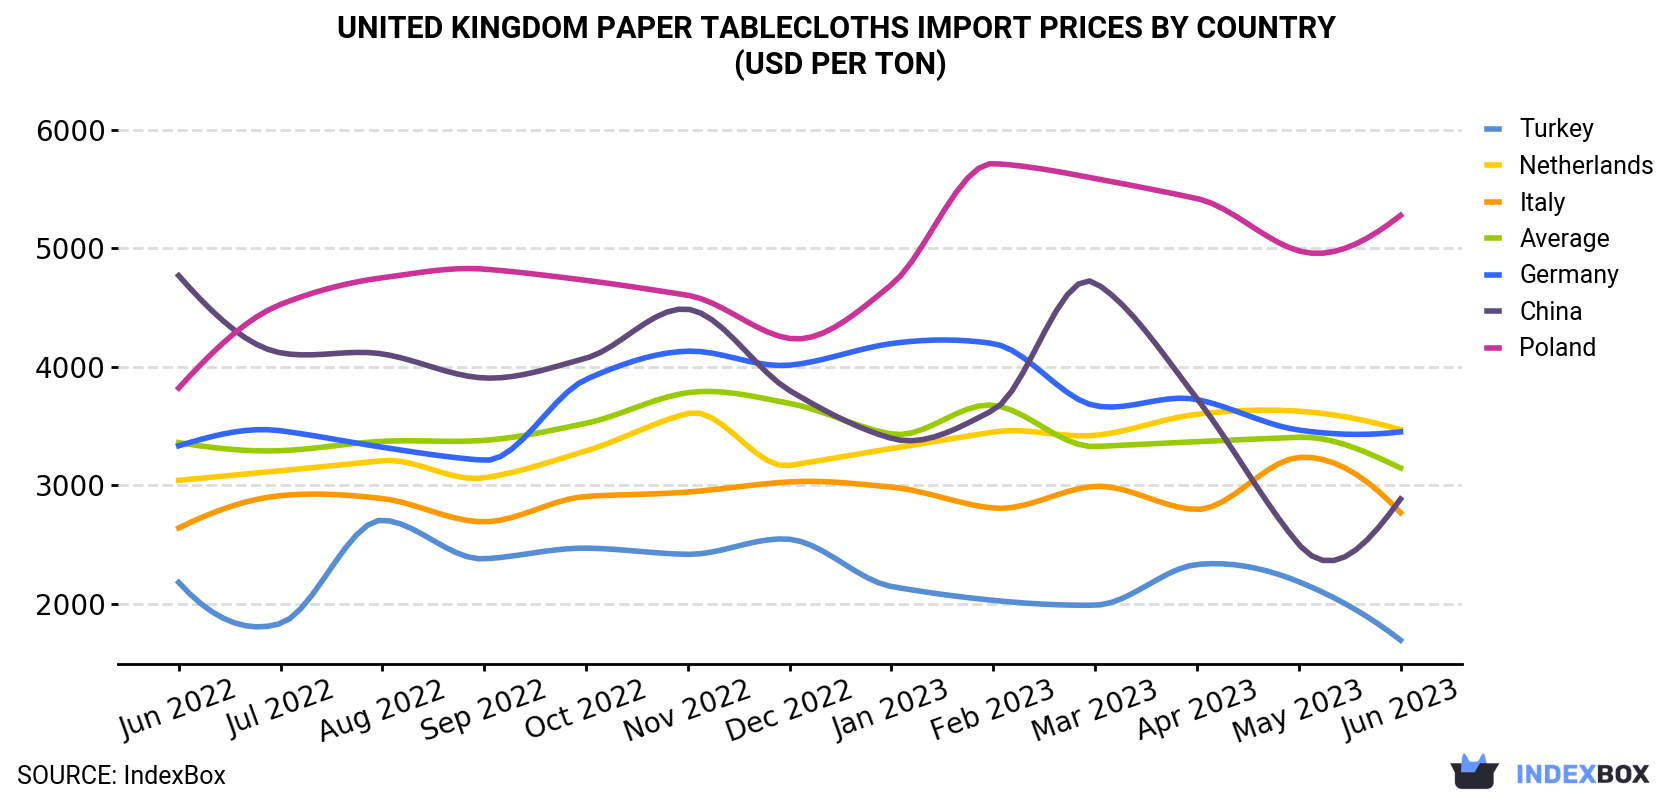 United Kingdom Paper Tablecloths Import Prices By Country (USD Per Ton)